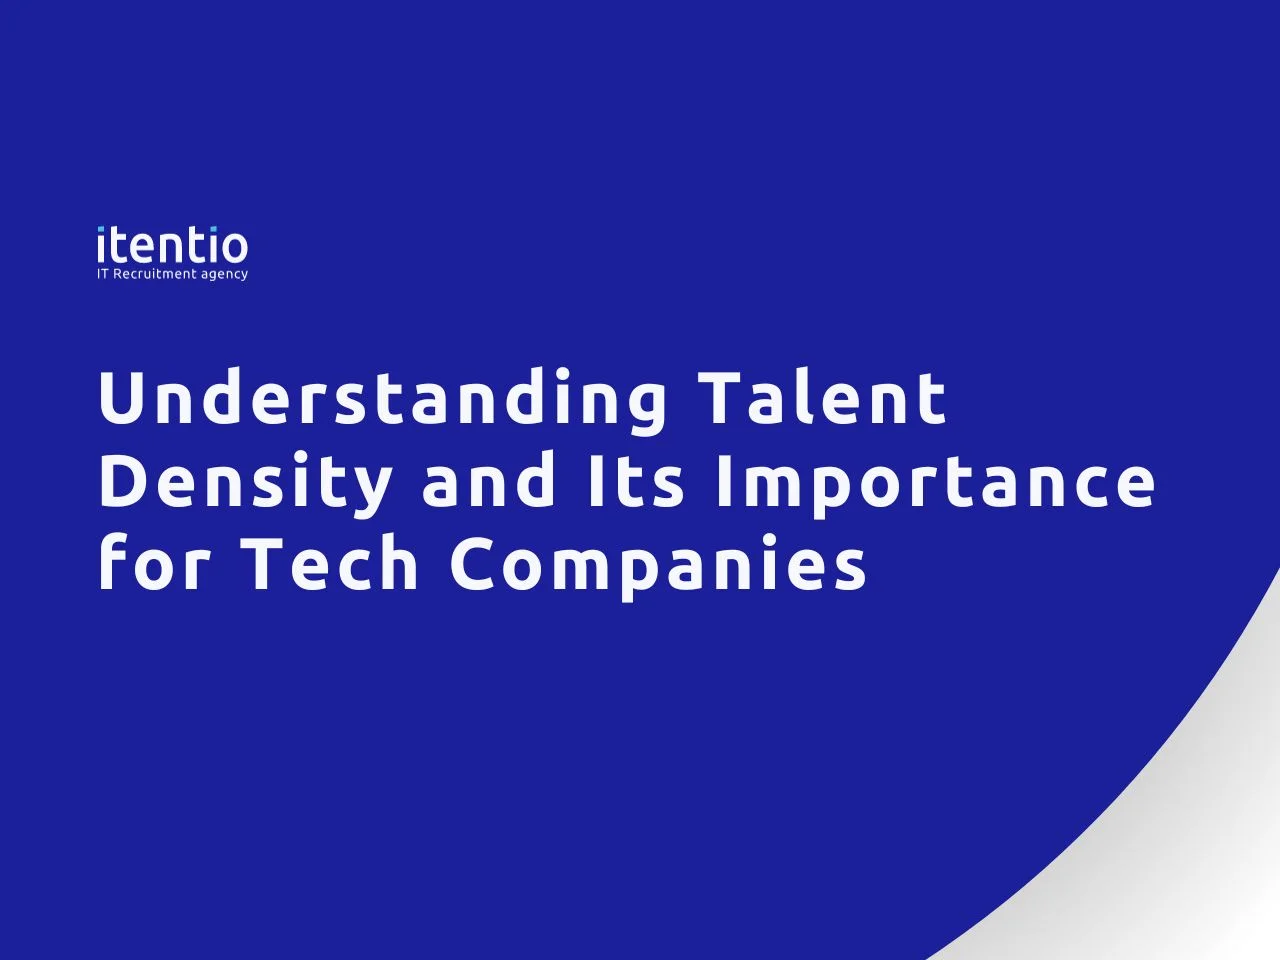 Understanding Talent Density and Its Importance for Tech Companies